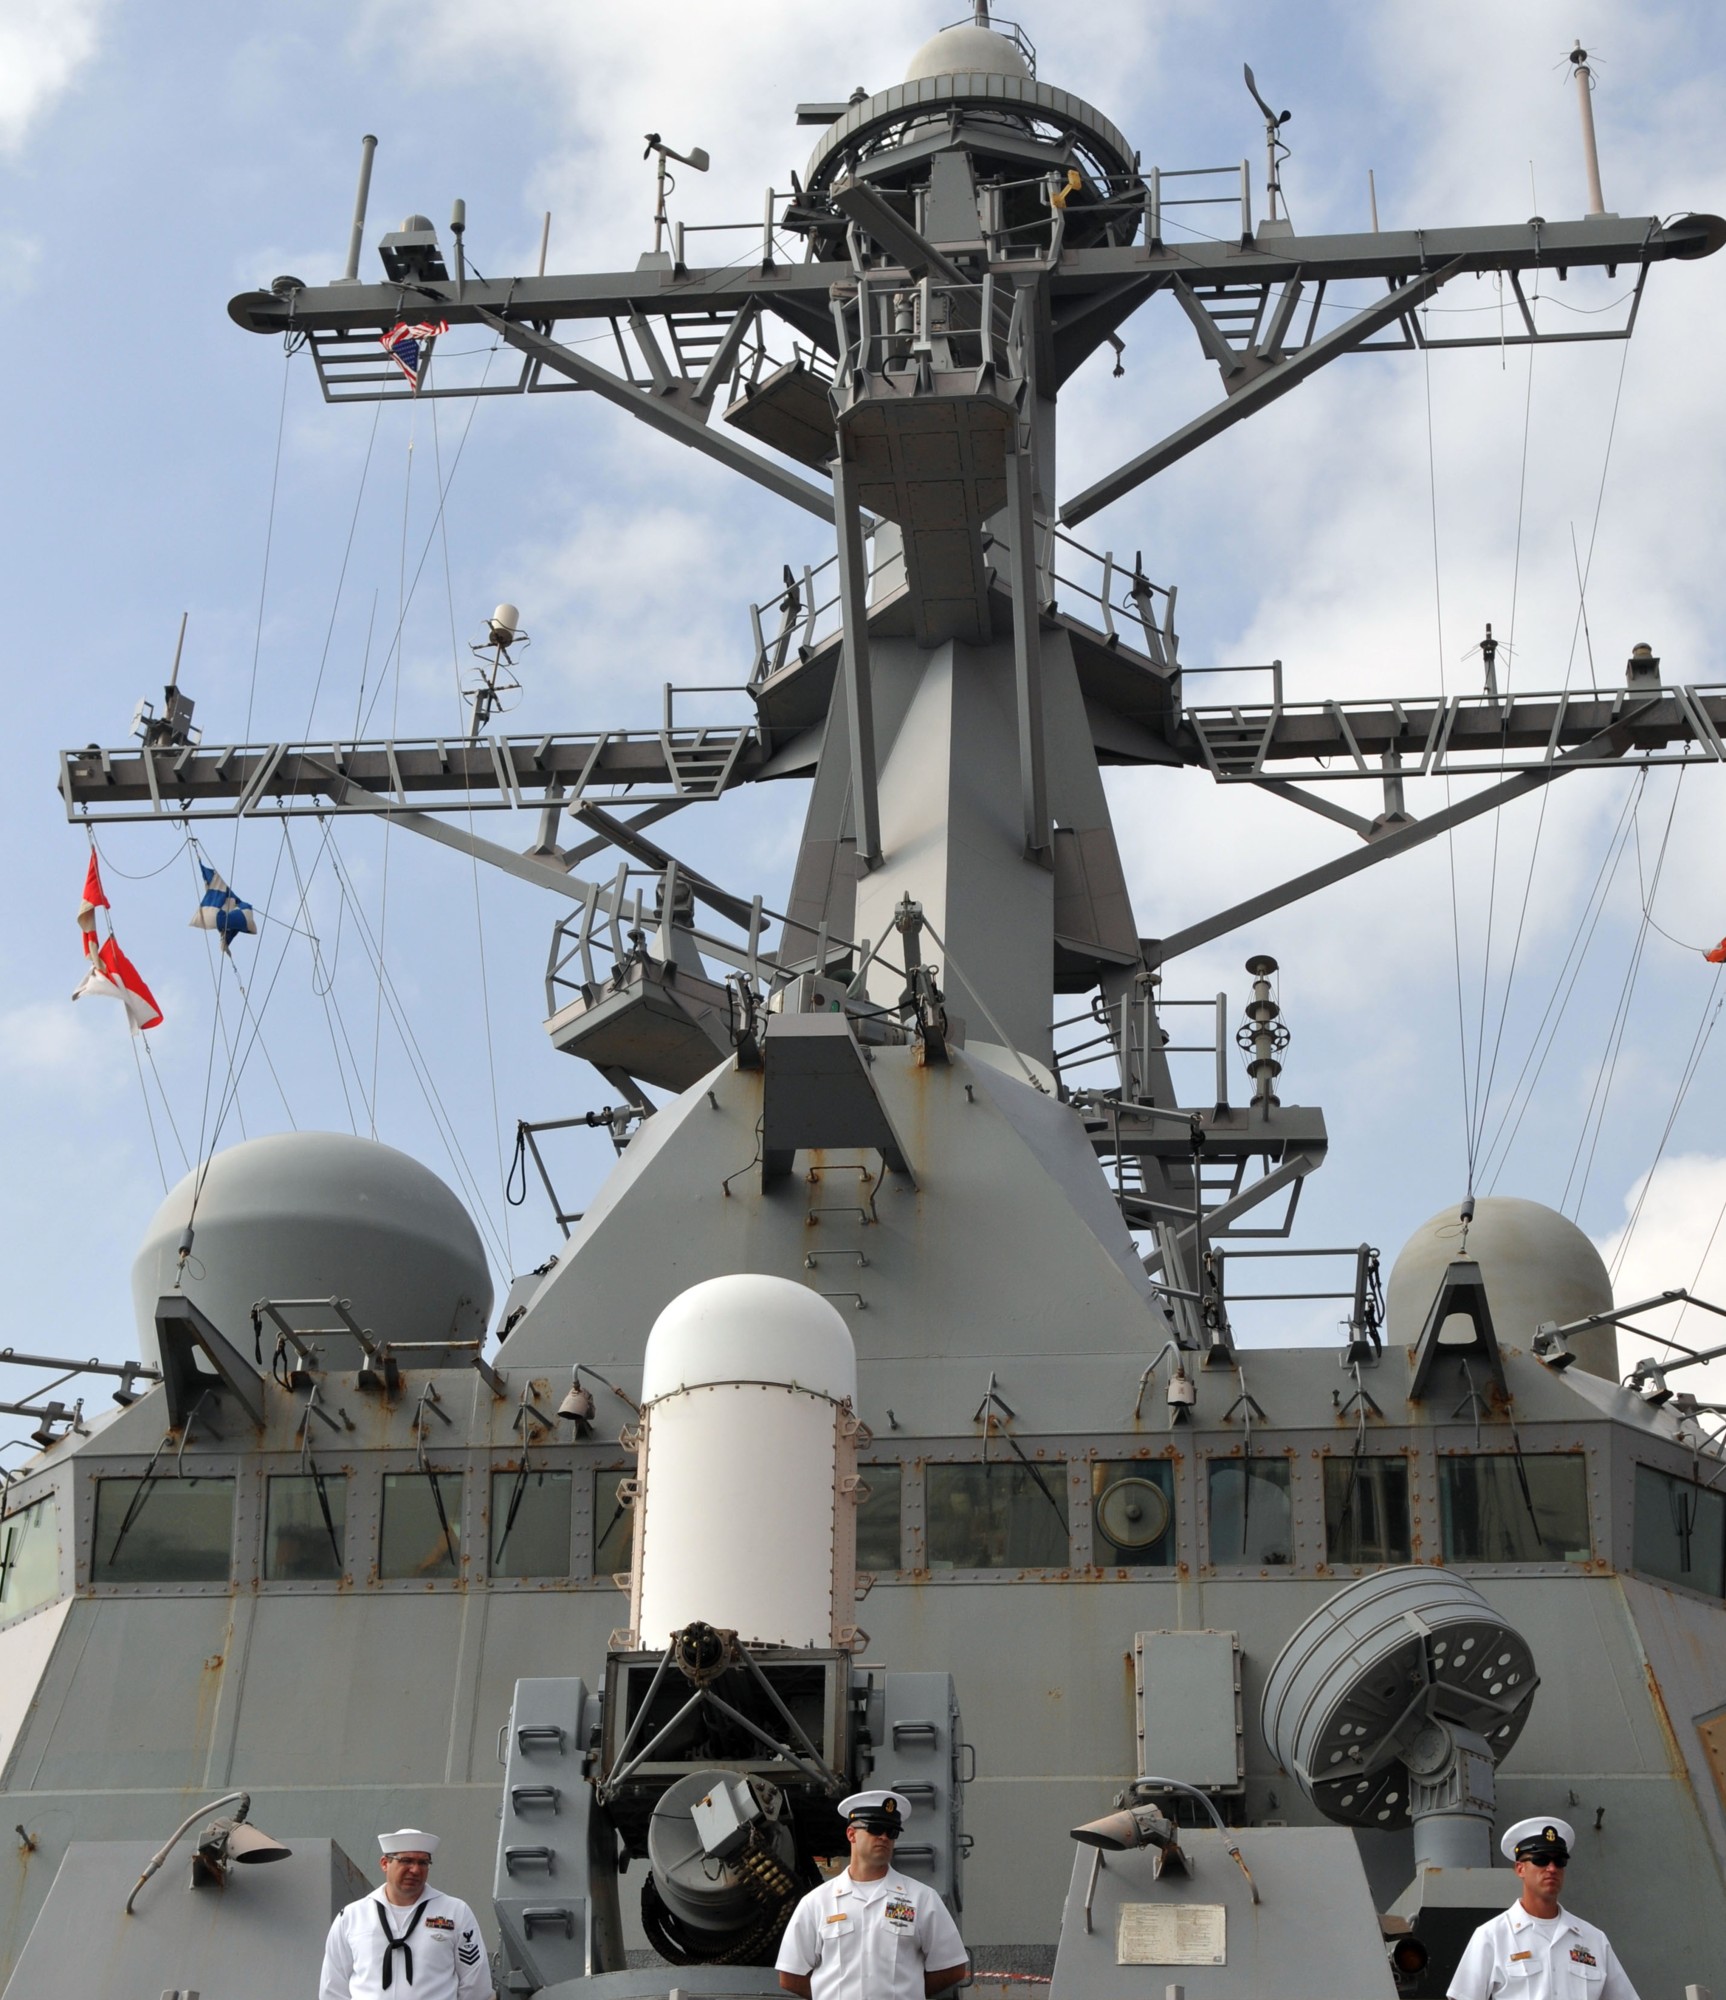 ddg-73 uss decatur guided missile destroyer arleigh burke class aegis bmd 28 chennai india